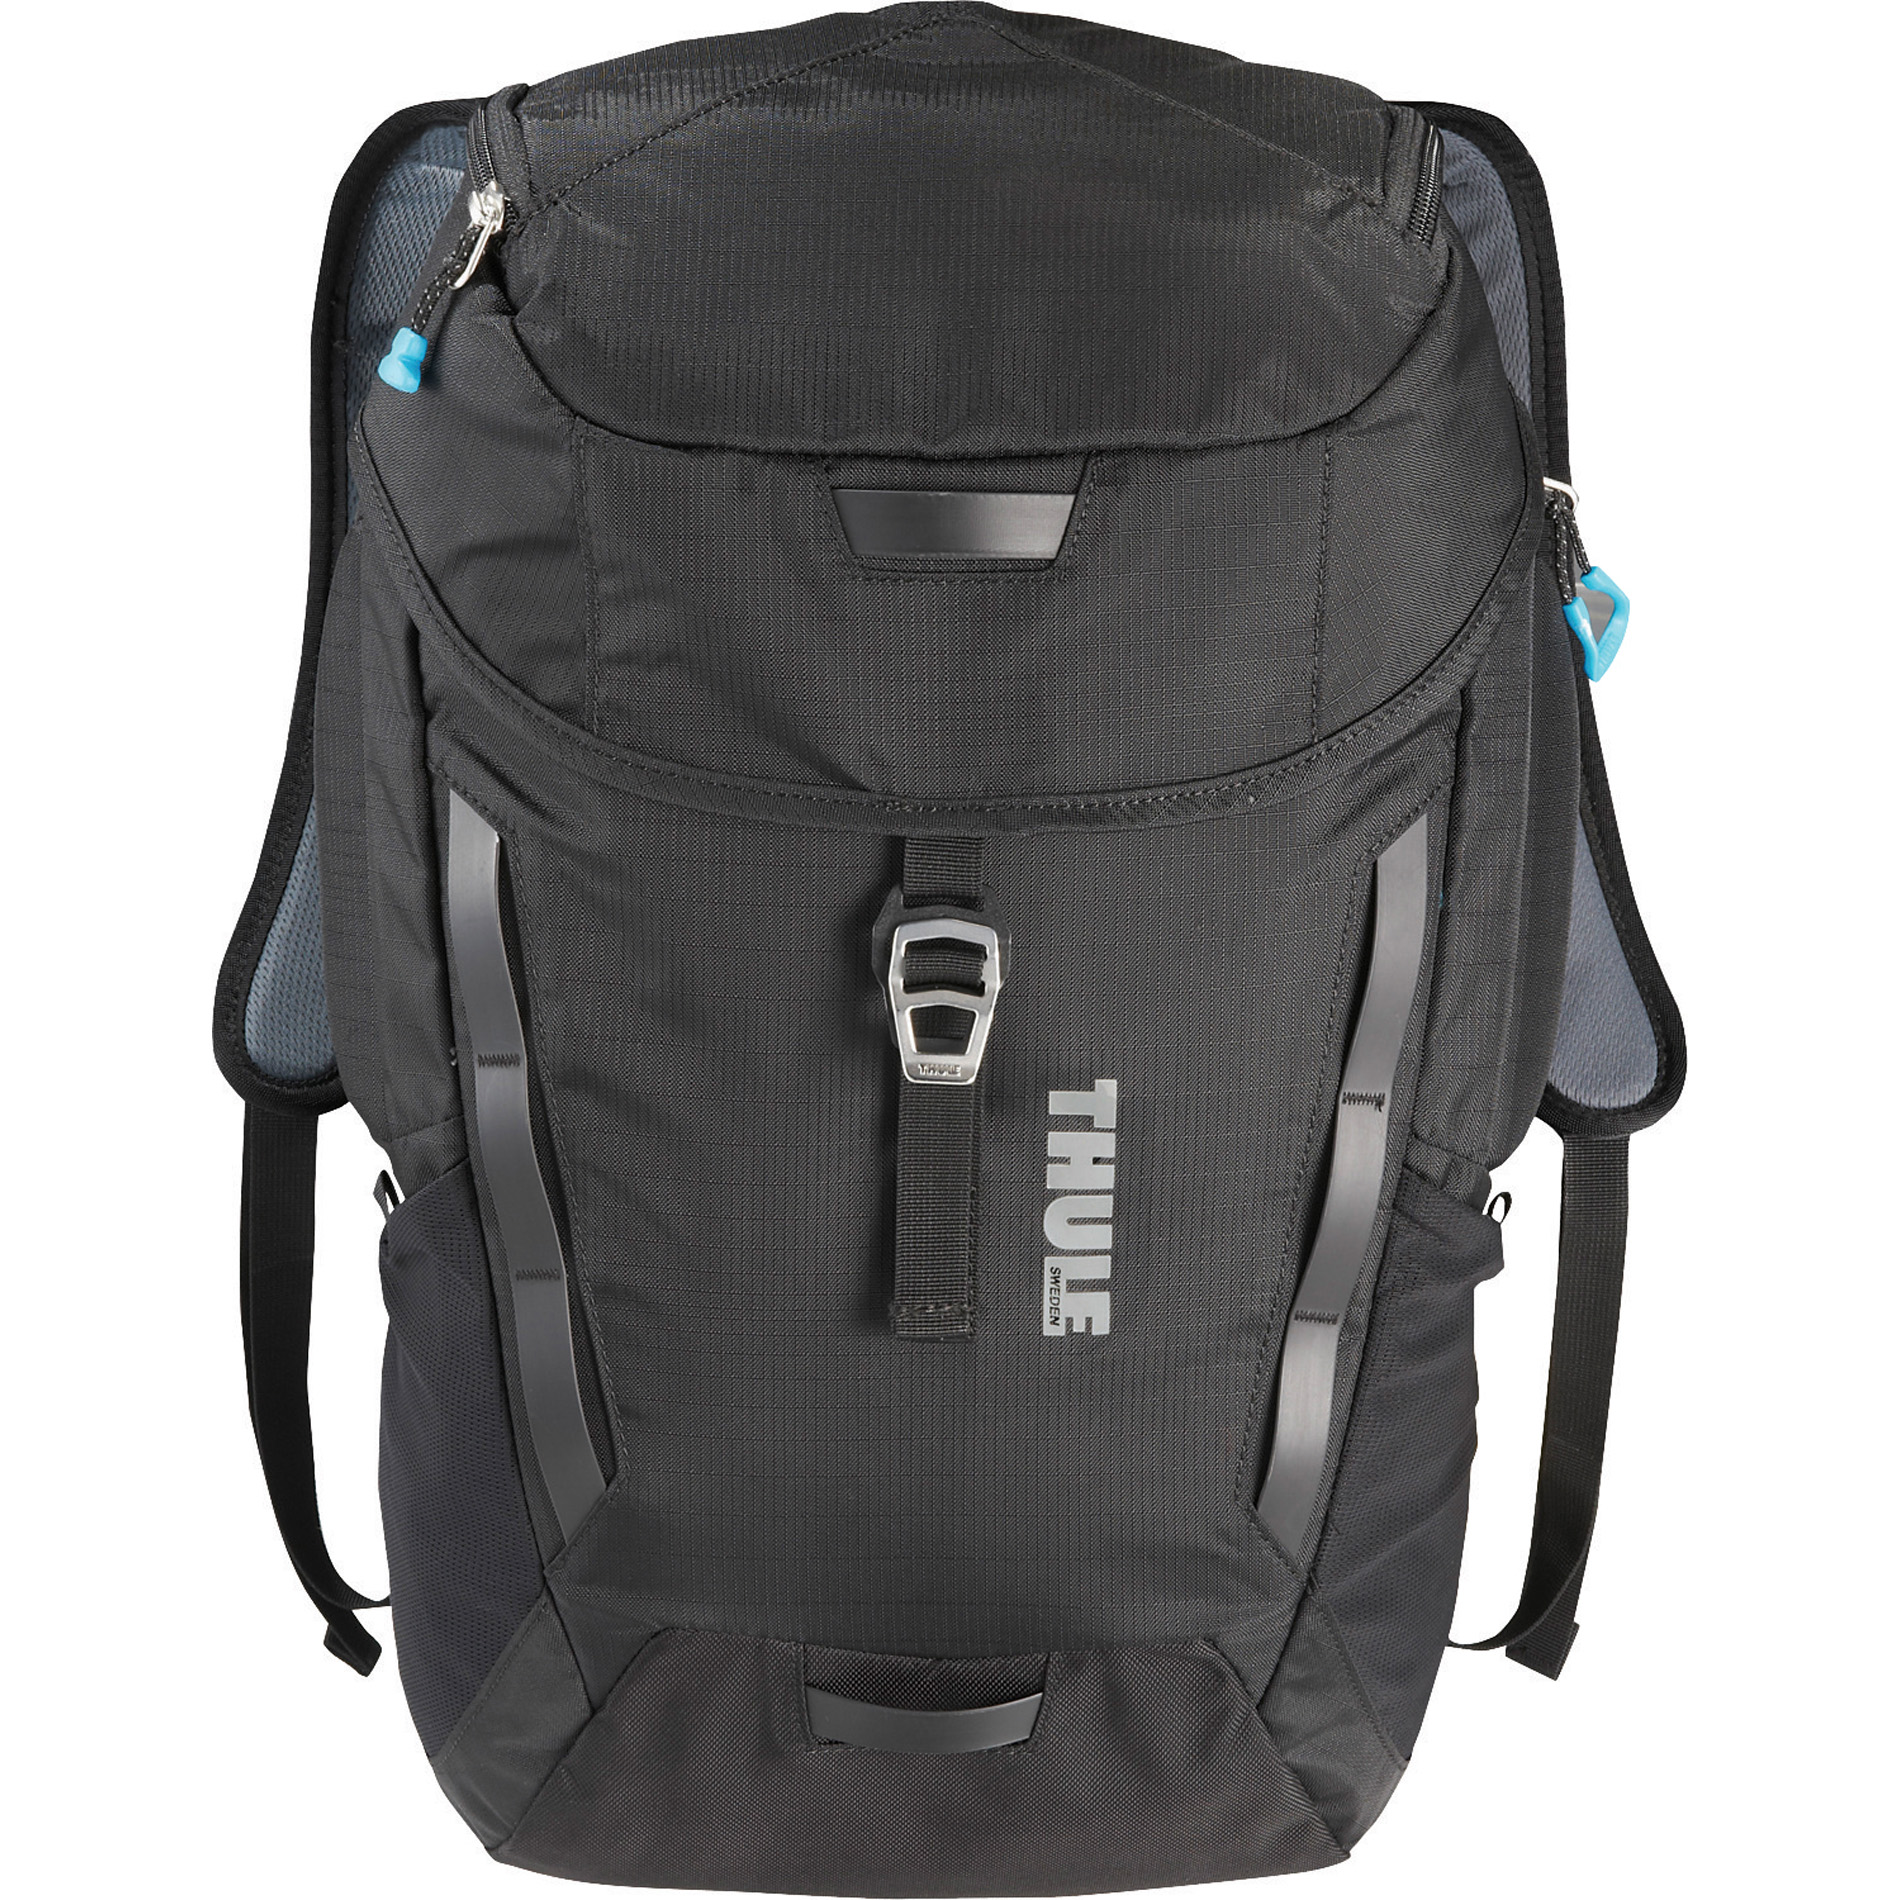 Thule 9020-03 - Enroute Mosey Backpack